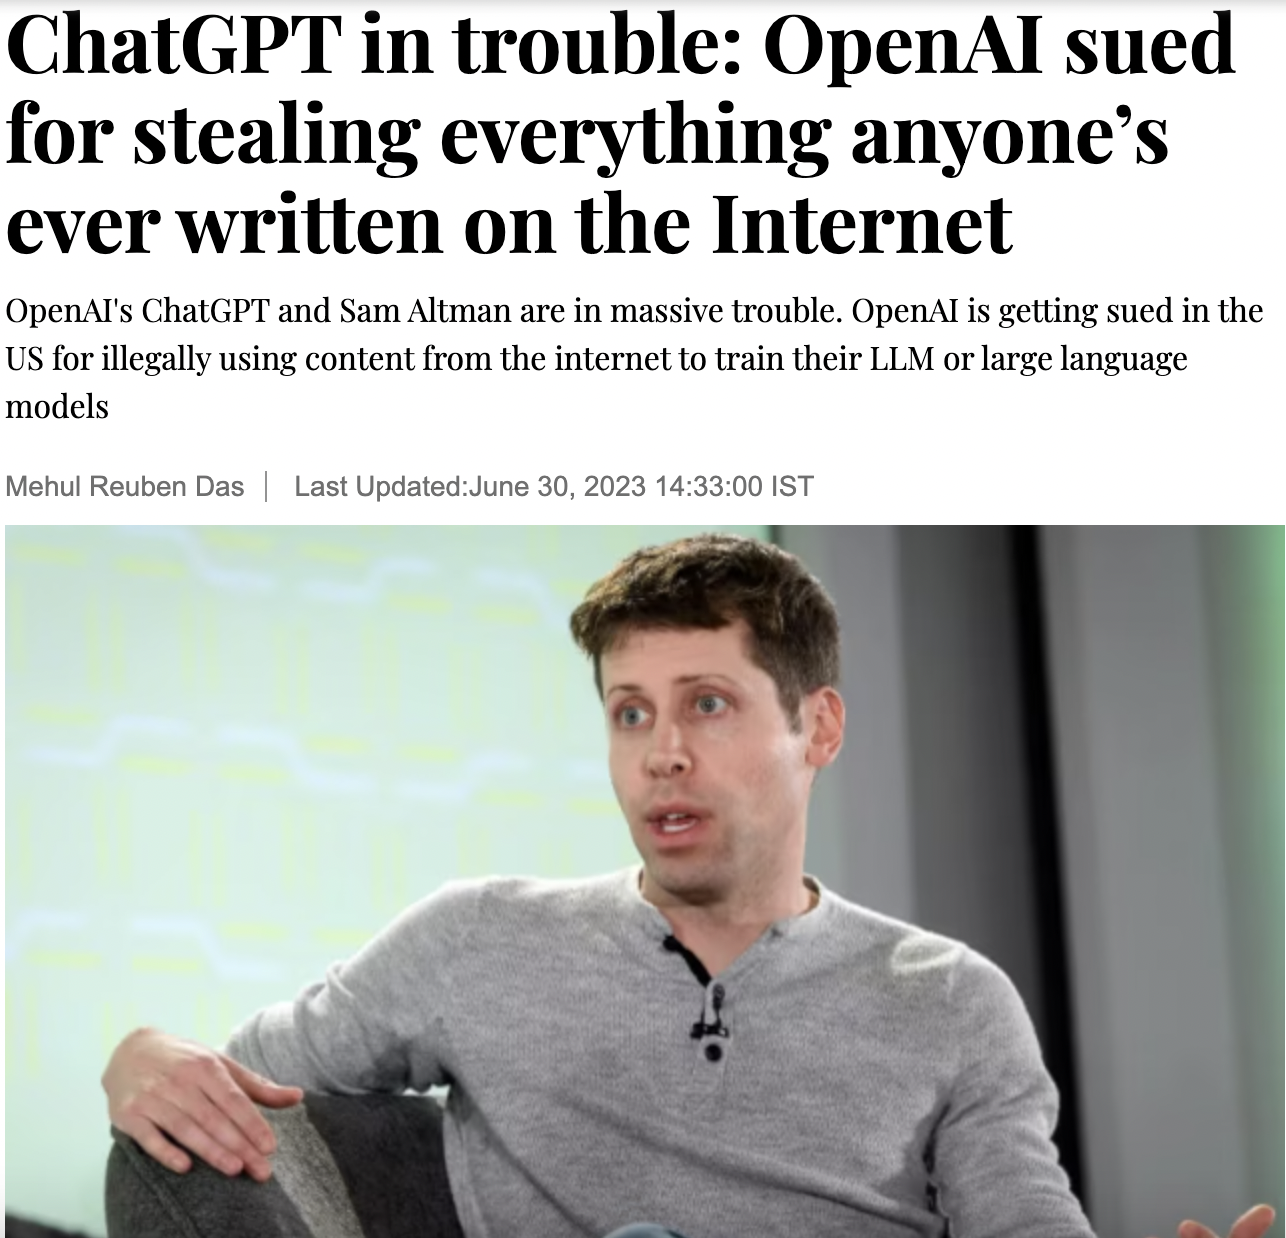 times newspaper - ChatGPT in trouble OpenAI sued for stealing everything anyone's ever written on the Internet OpenAl's ChatGPT and Sam Altman are in massive trouble. OpenAl is getting sued in the Us for illegally using content from the internet to train 